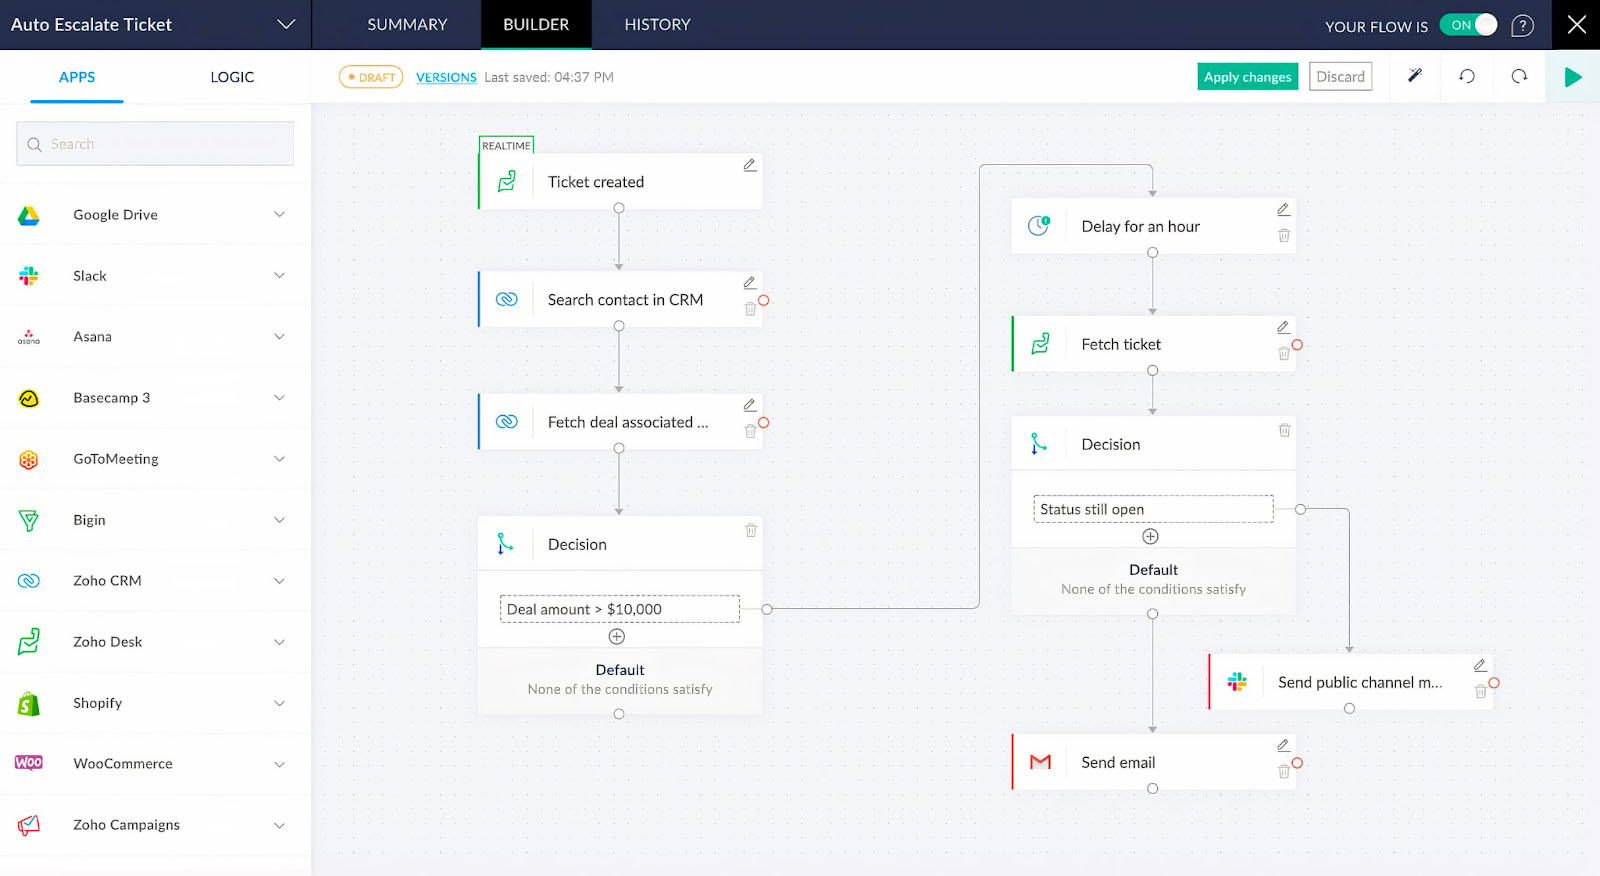 Zoho CRM automation flow example.